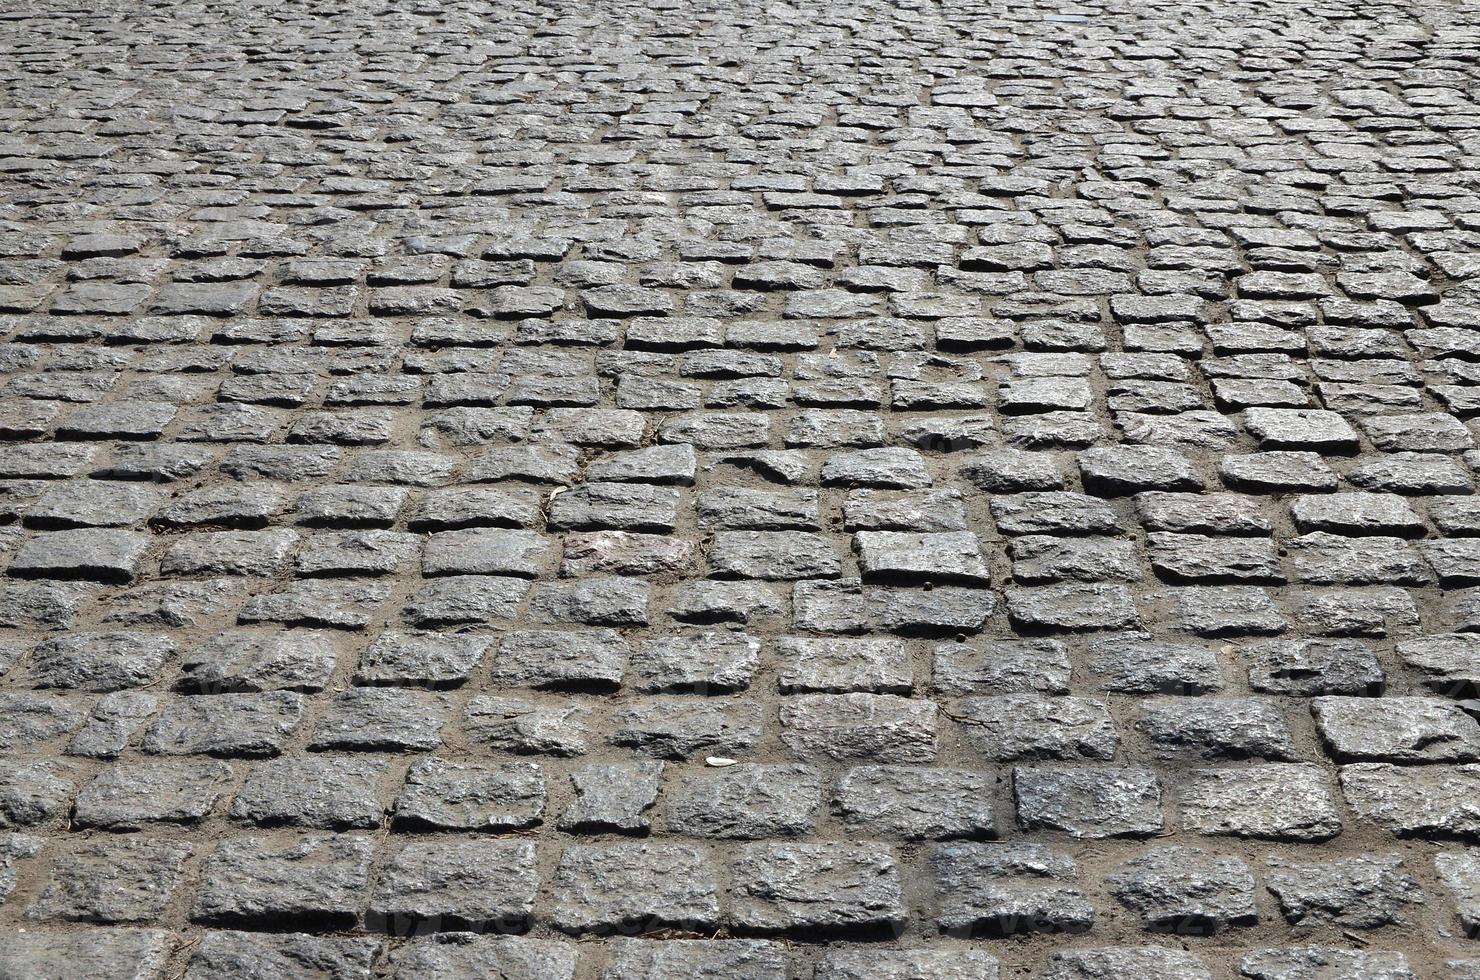 Background photo close-up of a large platform of paving stone in perspective